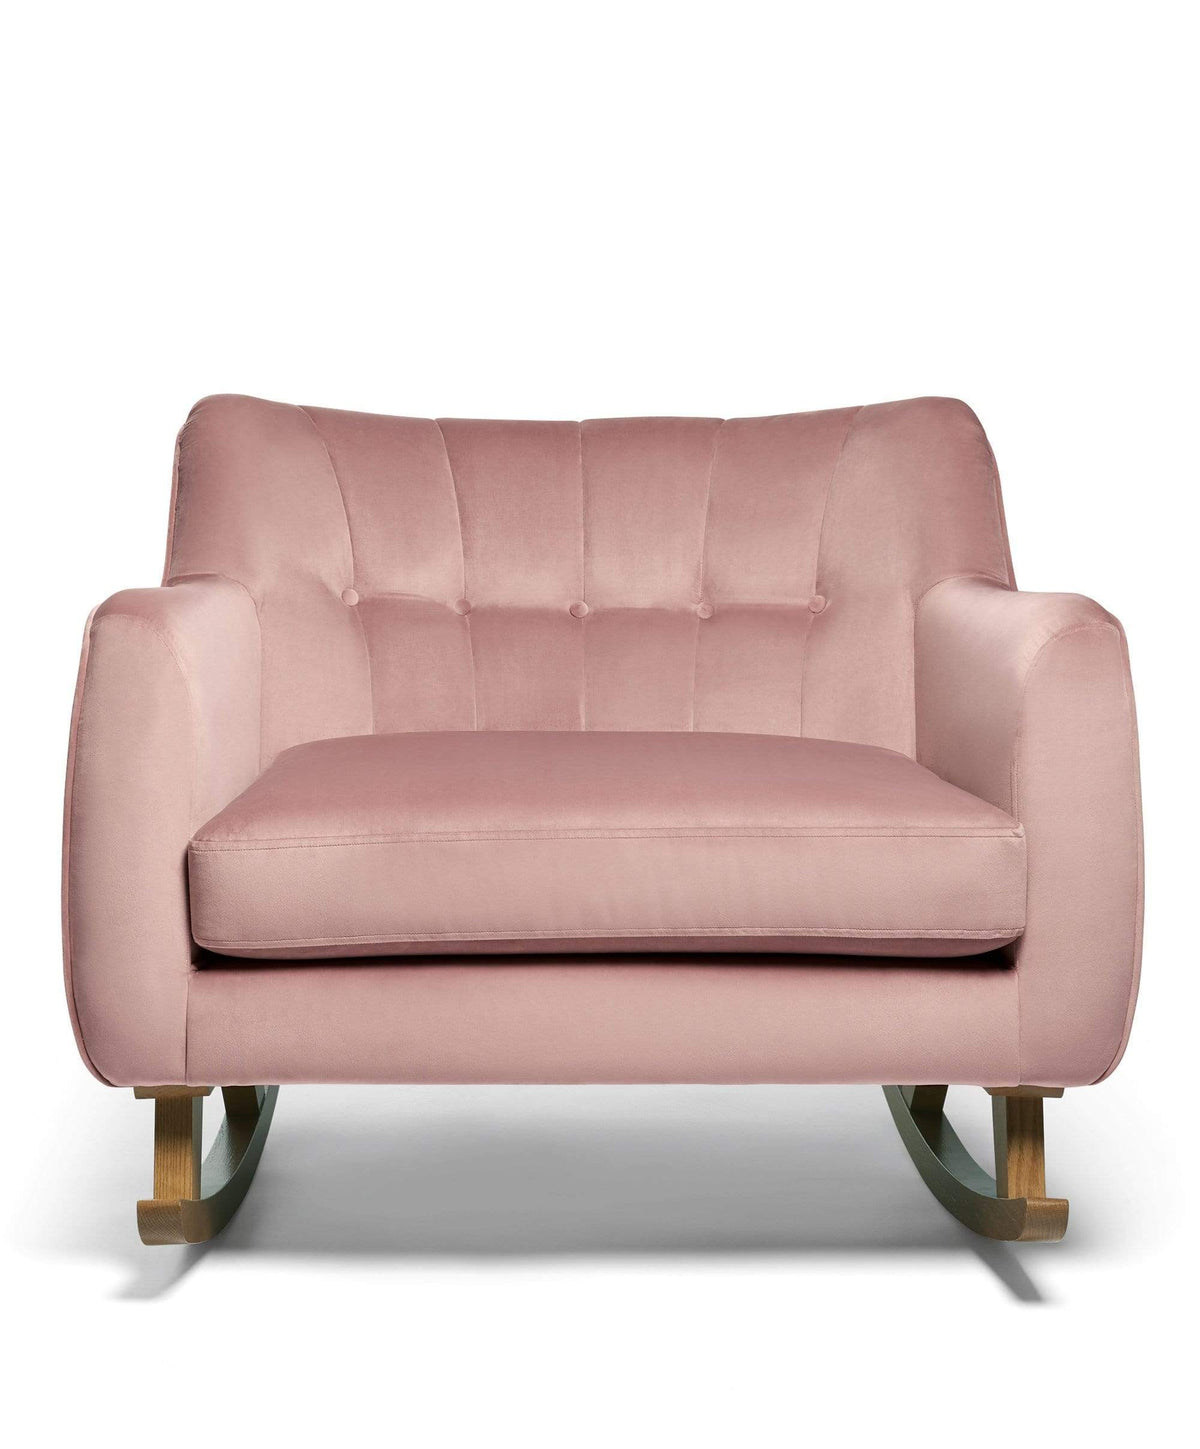 NEW Blush Pink Sofas are Here! – Snug